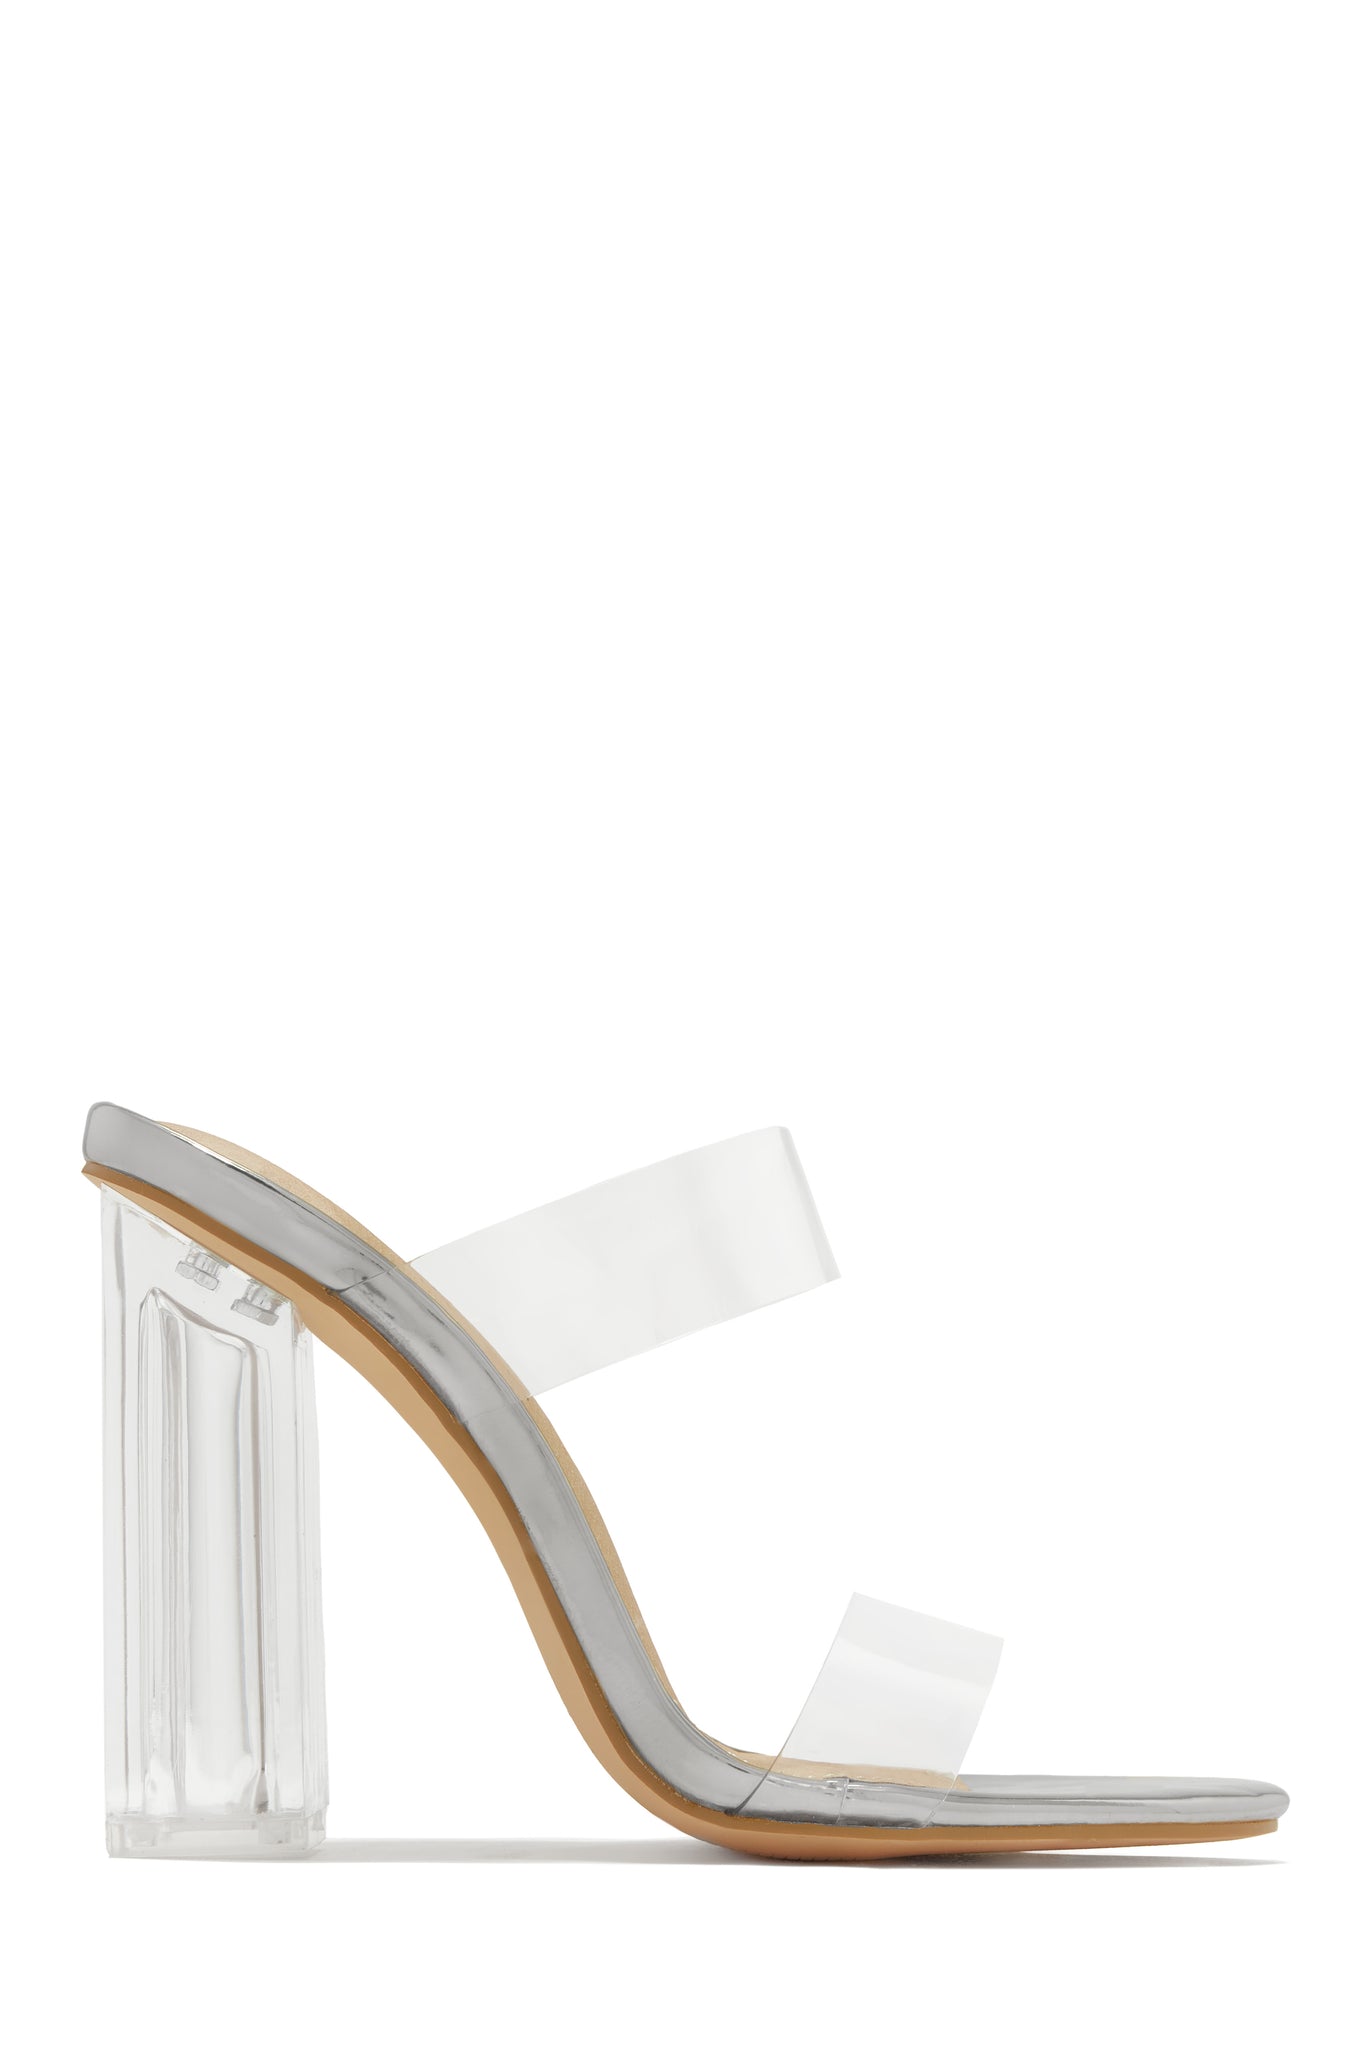 Miss Lola | Your Next Date Nude Clear Strap Block Heel Mules – MISS LOLA